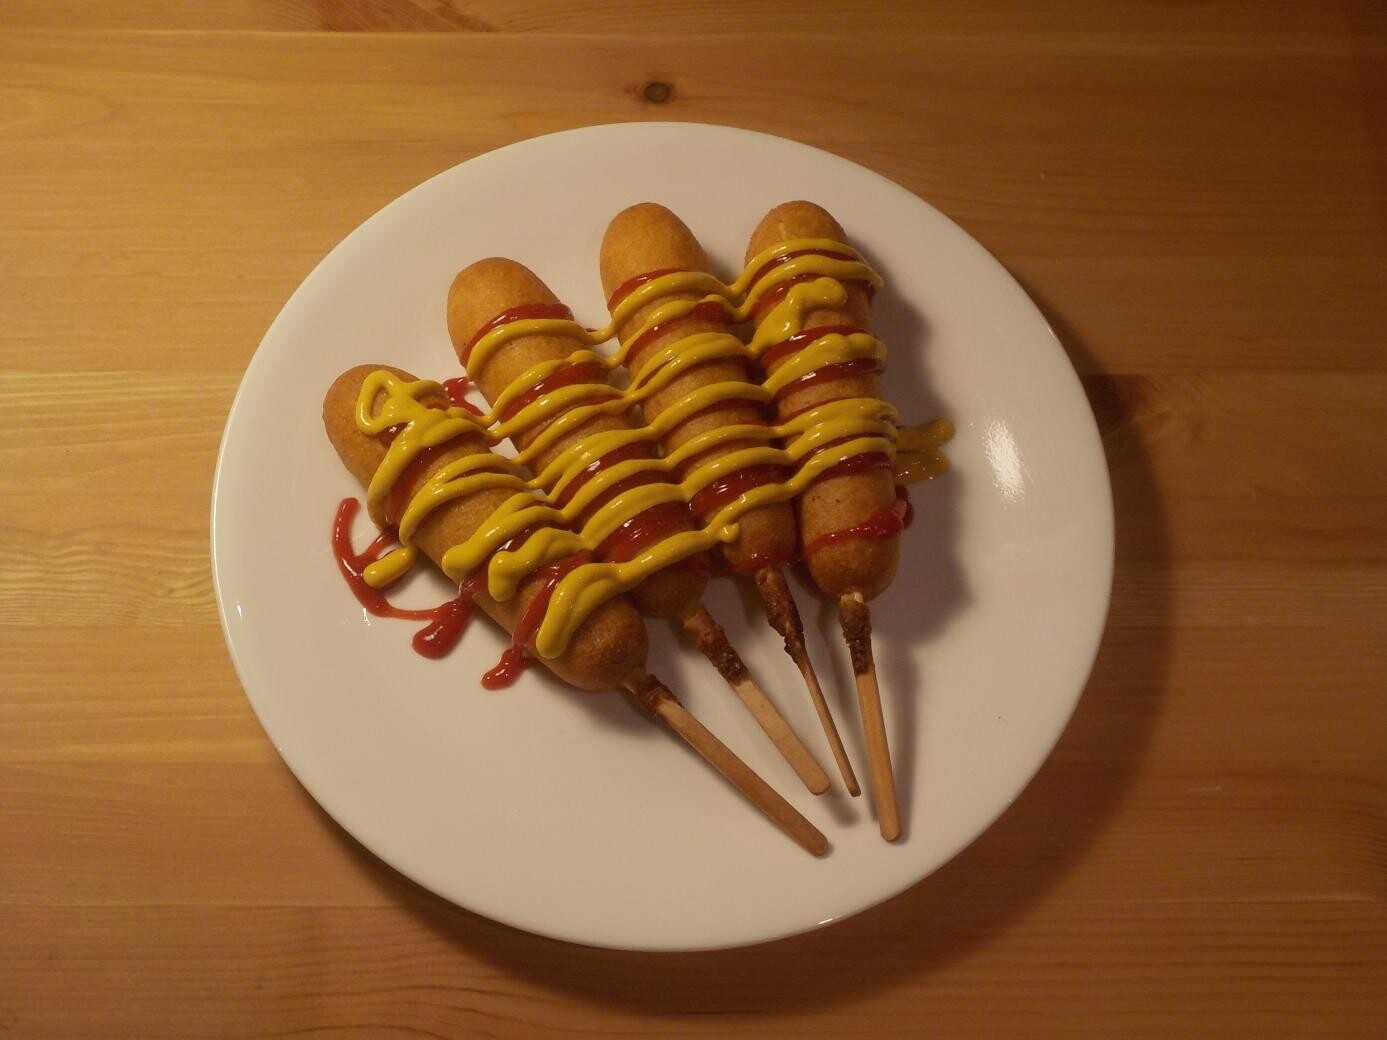 four corn dogs on a plate